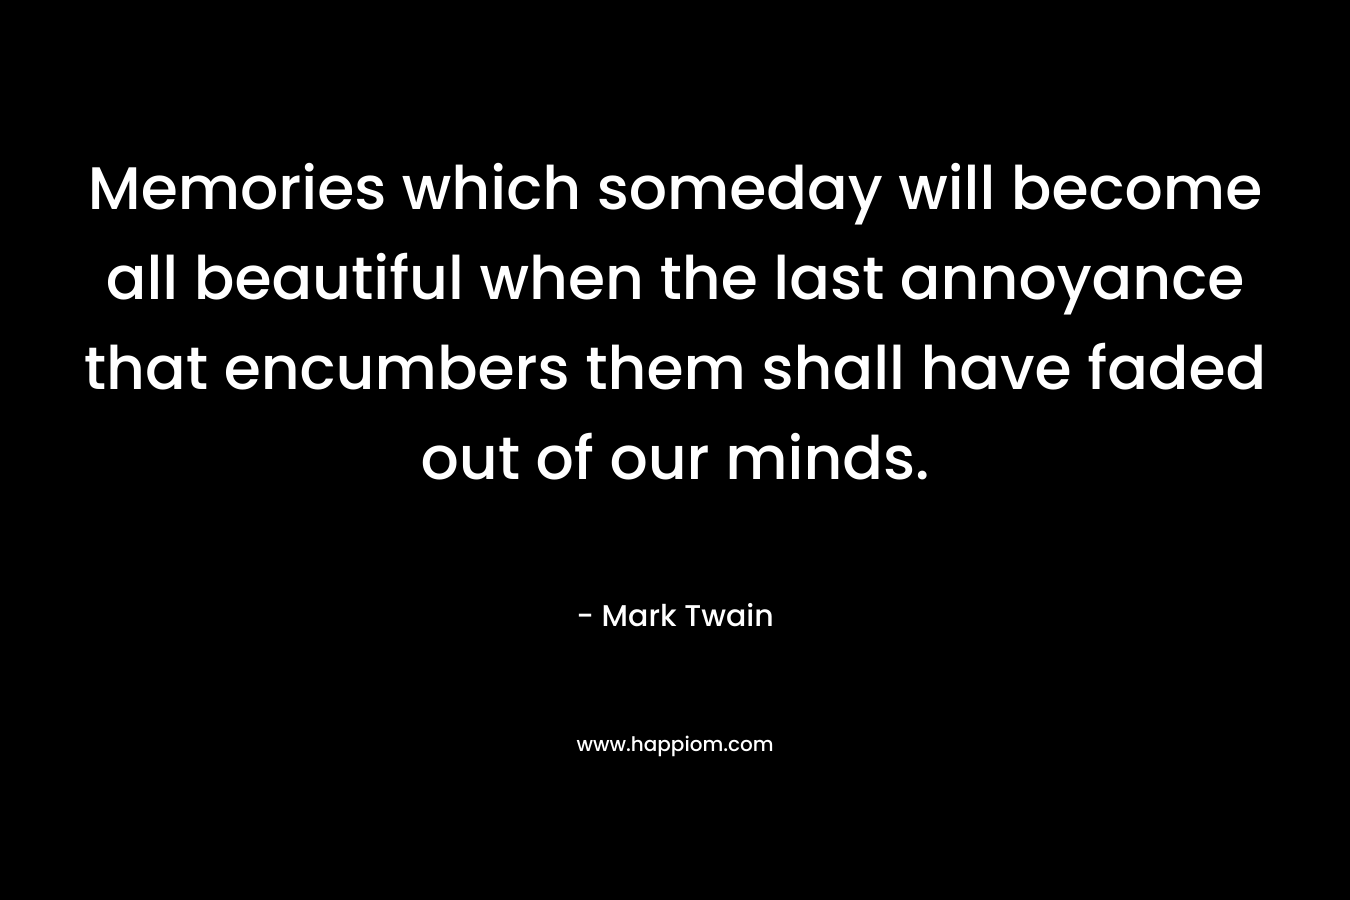 Memories which someday will become all beautiful when the last annoyance that encumbers them shall have faded out of our minds. – Mark Twain